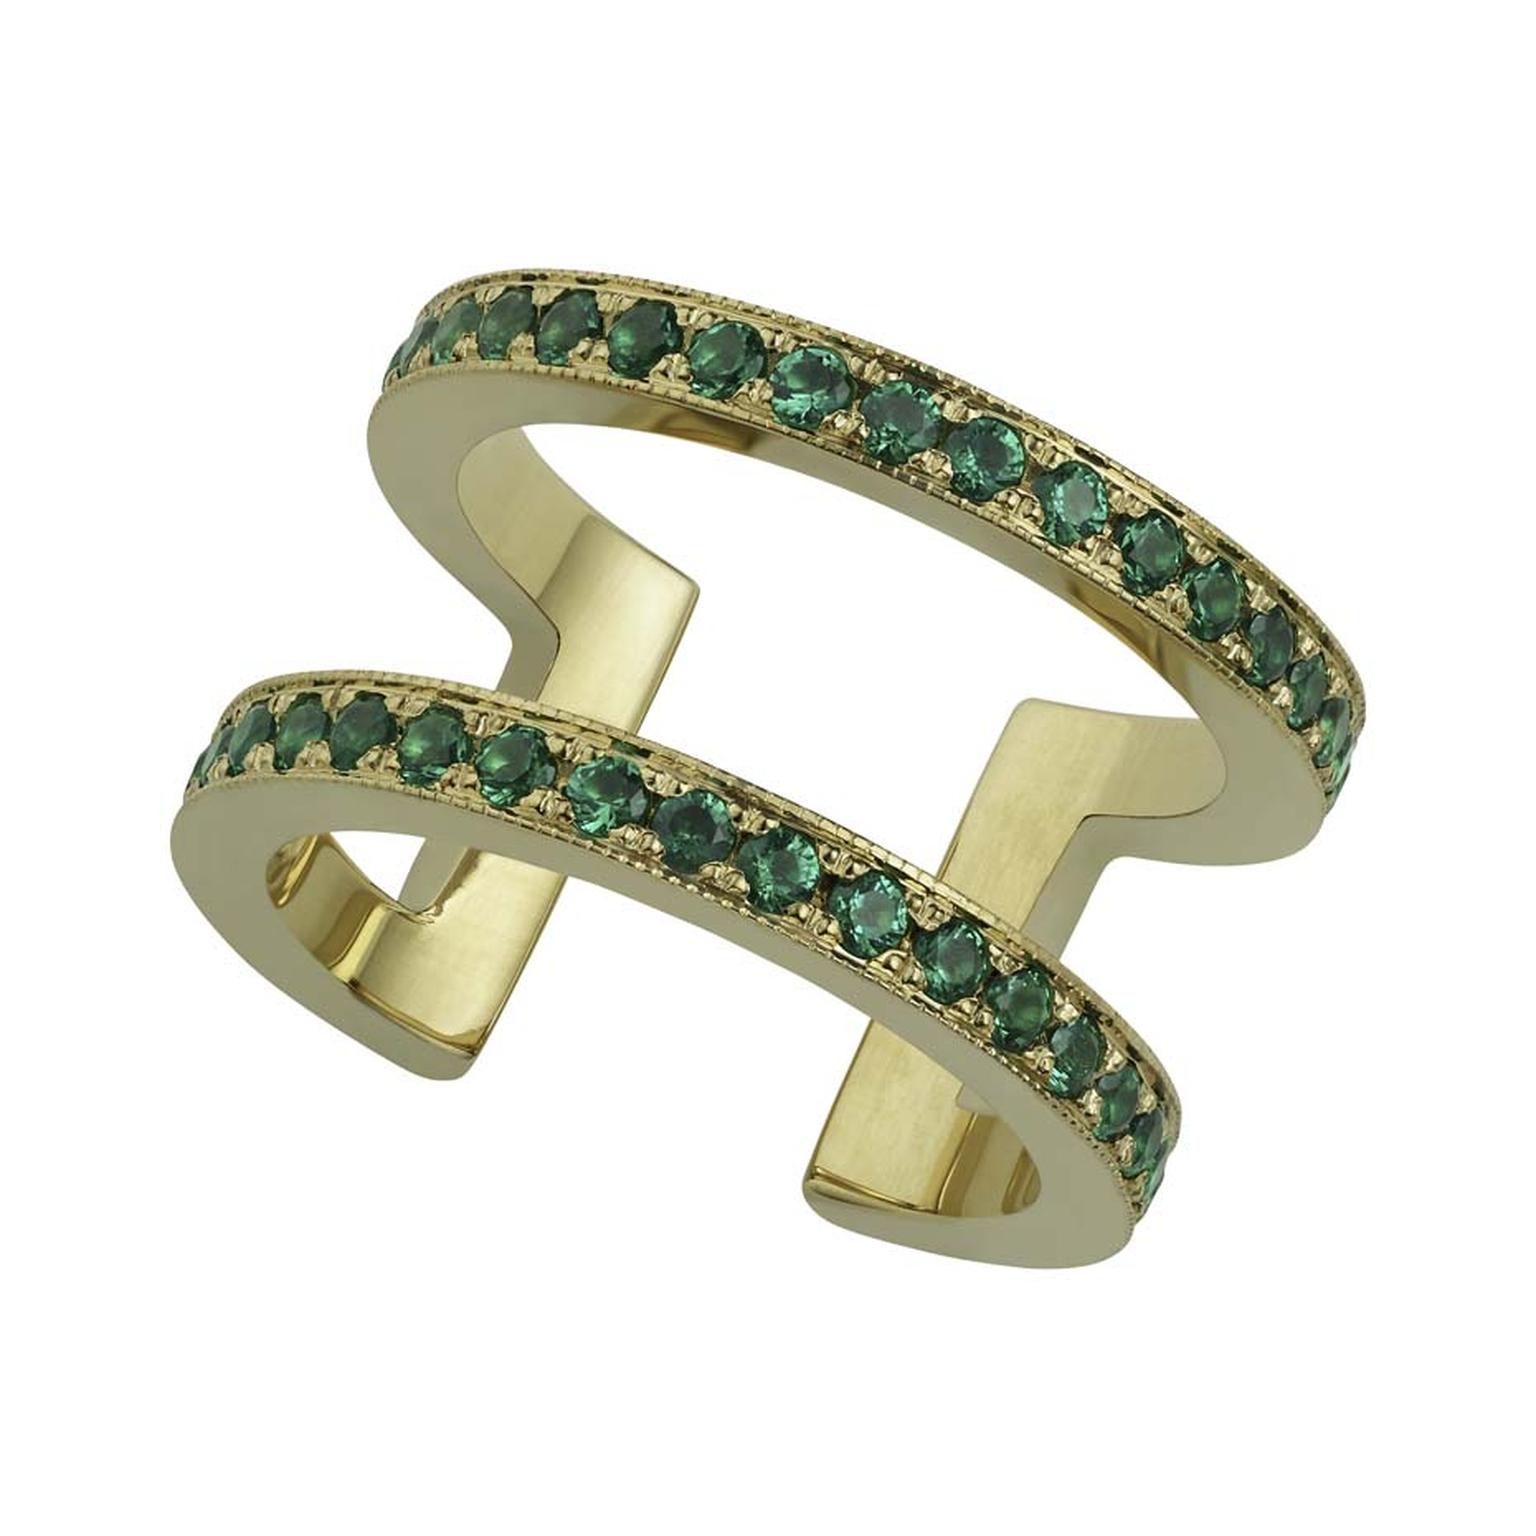 Misahara Korali statement ring has a thicker yellow gold band, set with emeralds.